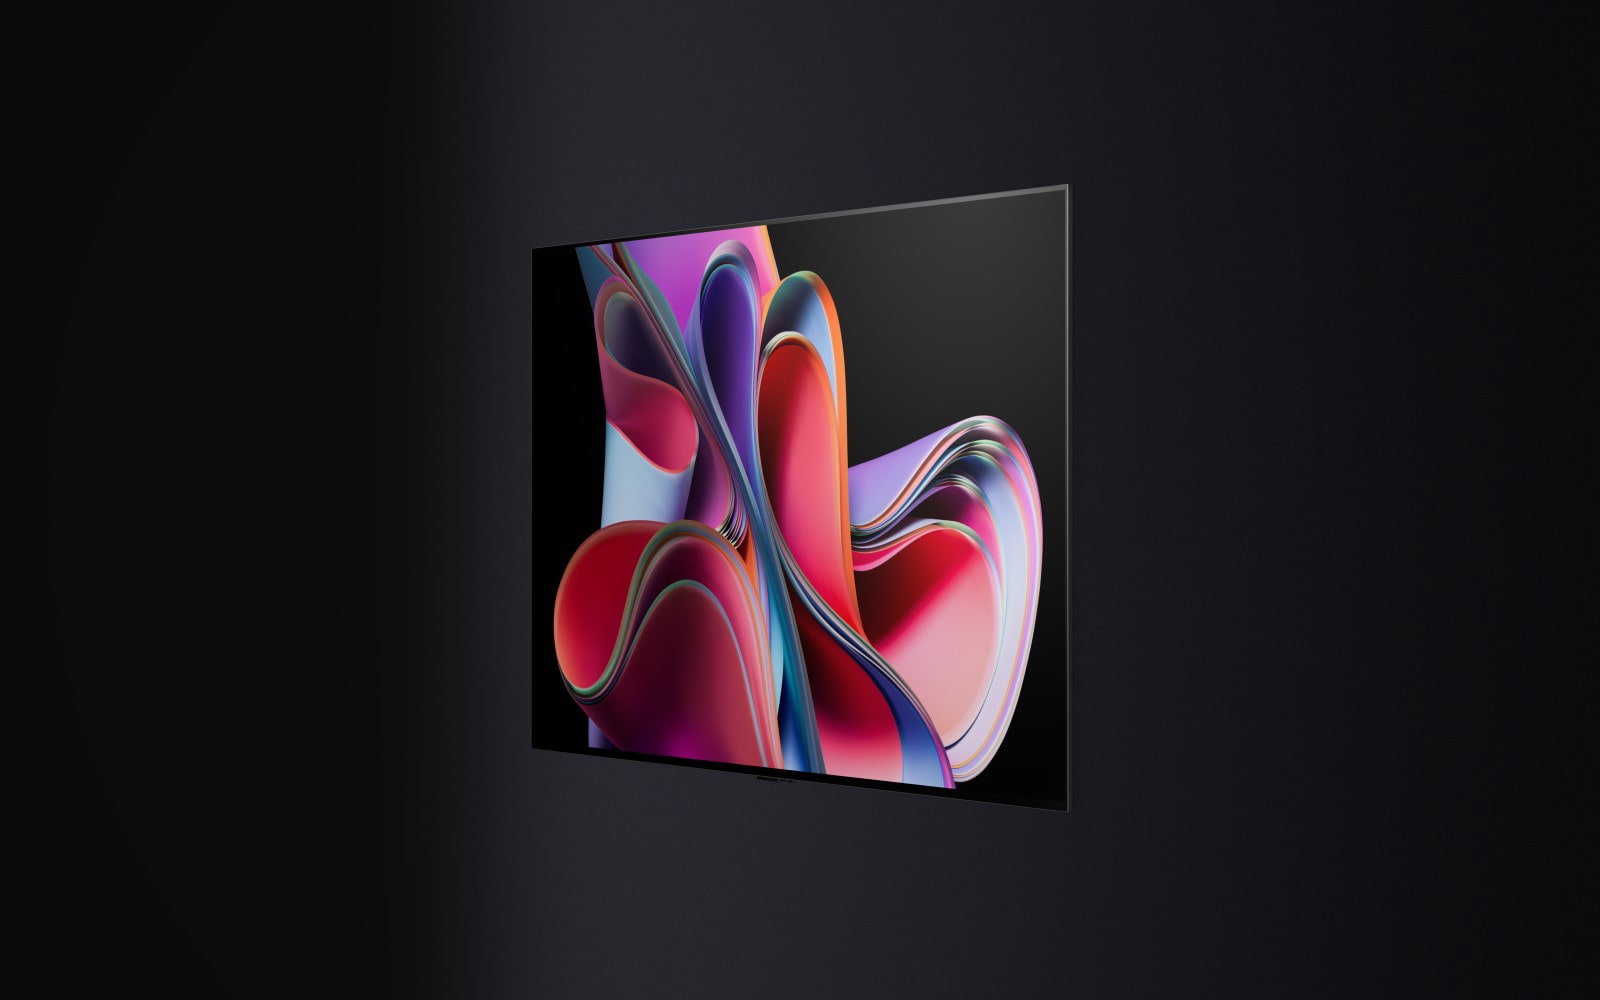 A video opens with the words LG OLED evo in a white font against a black background. The words enlargen and fill with color. Then the scene transitions to LG OLED G3, showing a colorful abstract artwork. The screen rotates to the side to present the slim edge and then fixes to a wall, representing the One Wall Design.